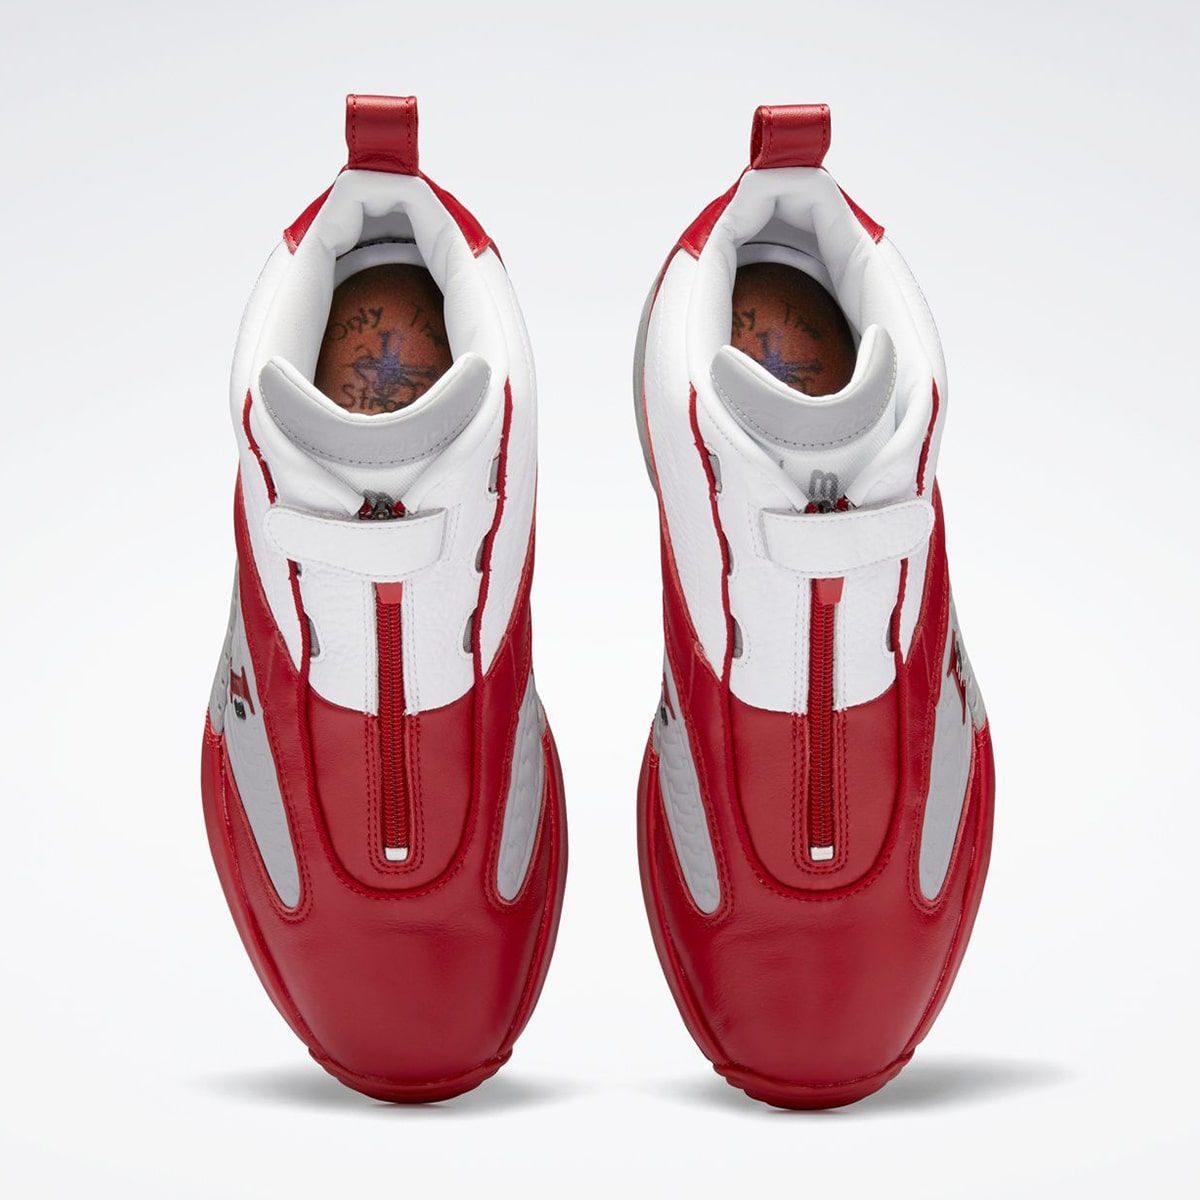 Reebok Answer 4 'White/Red' Release Info: How to Buy a Pair